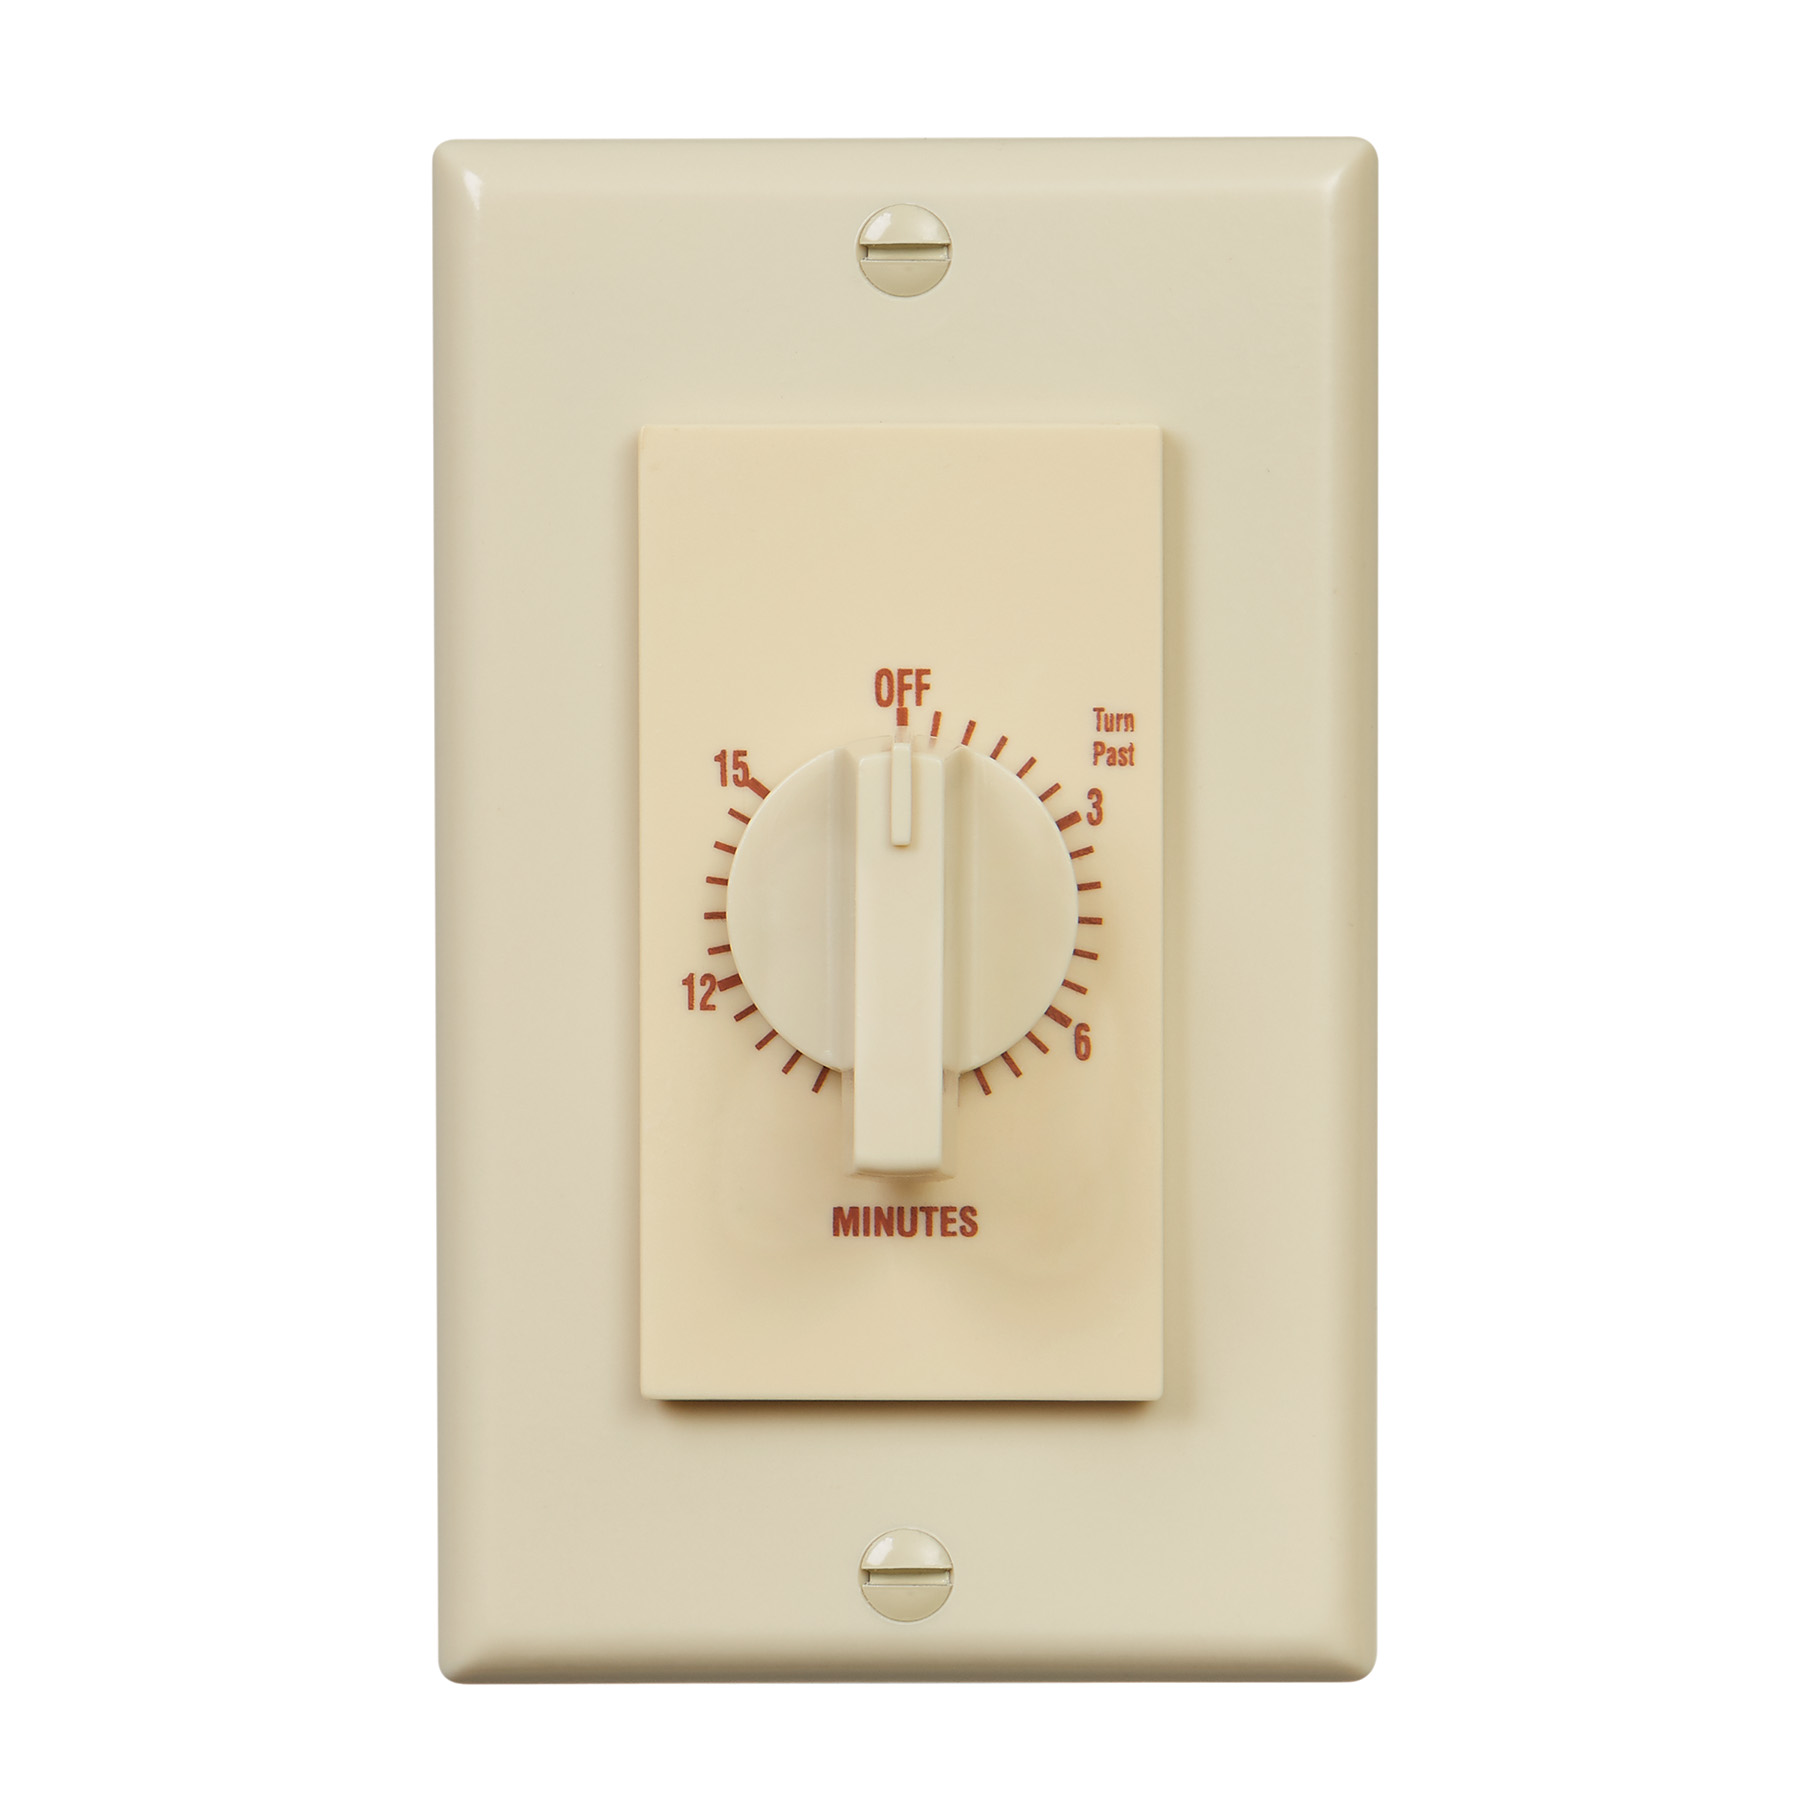 Broan-NuTone® 15-Minute Time Control, 20/10 amps, 120/240V, Ivory